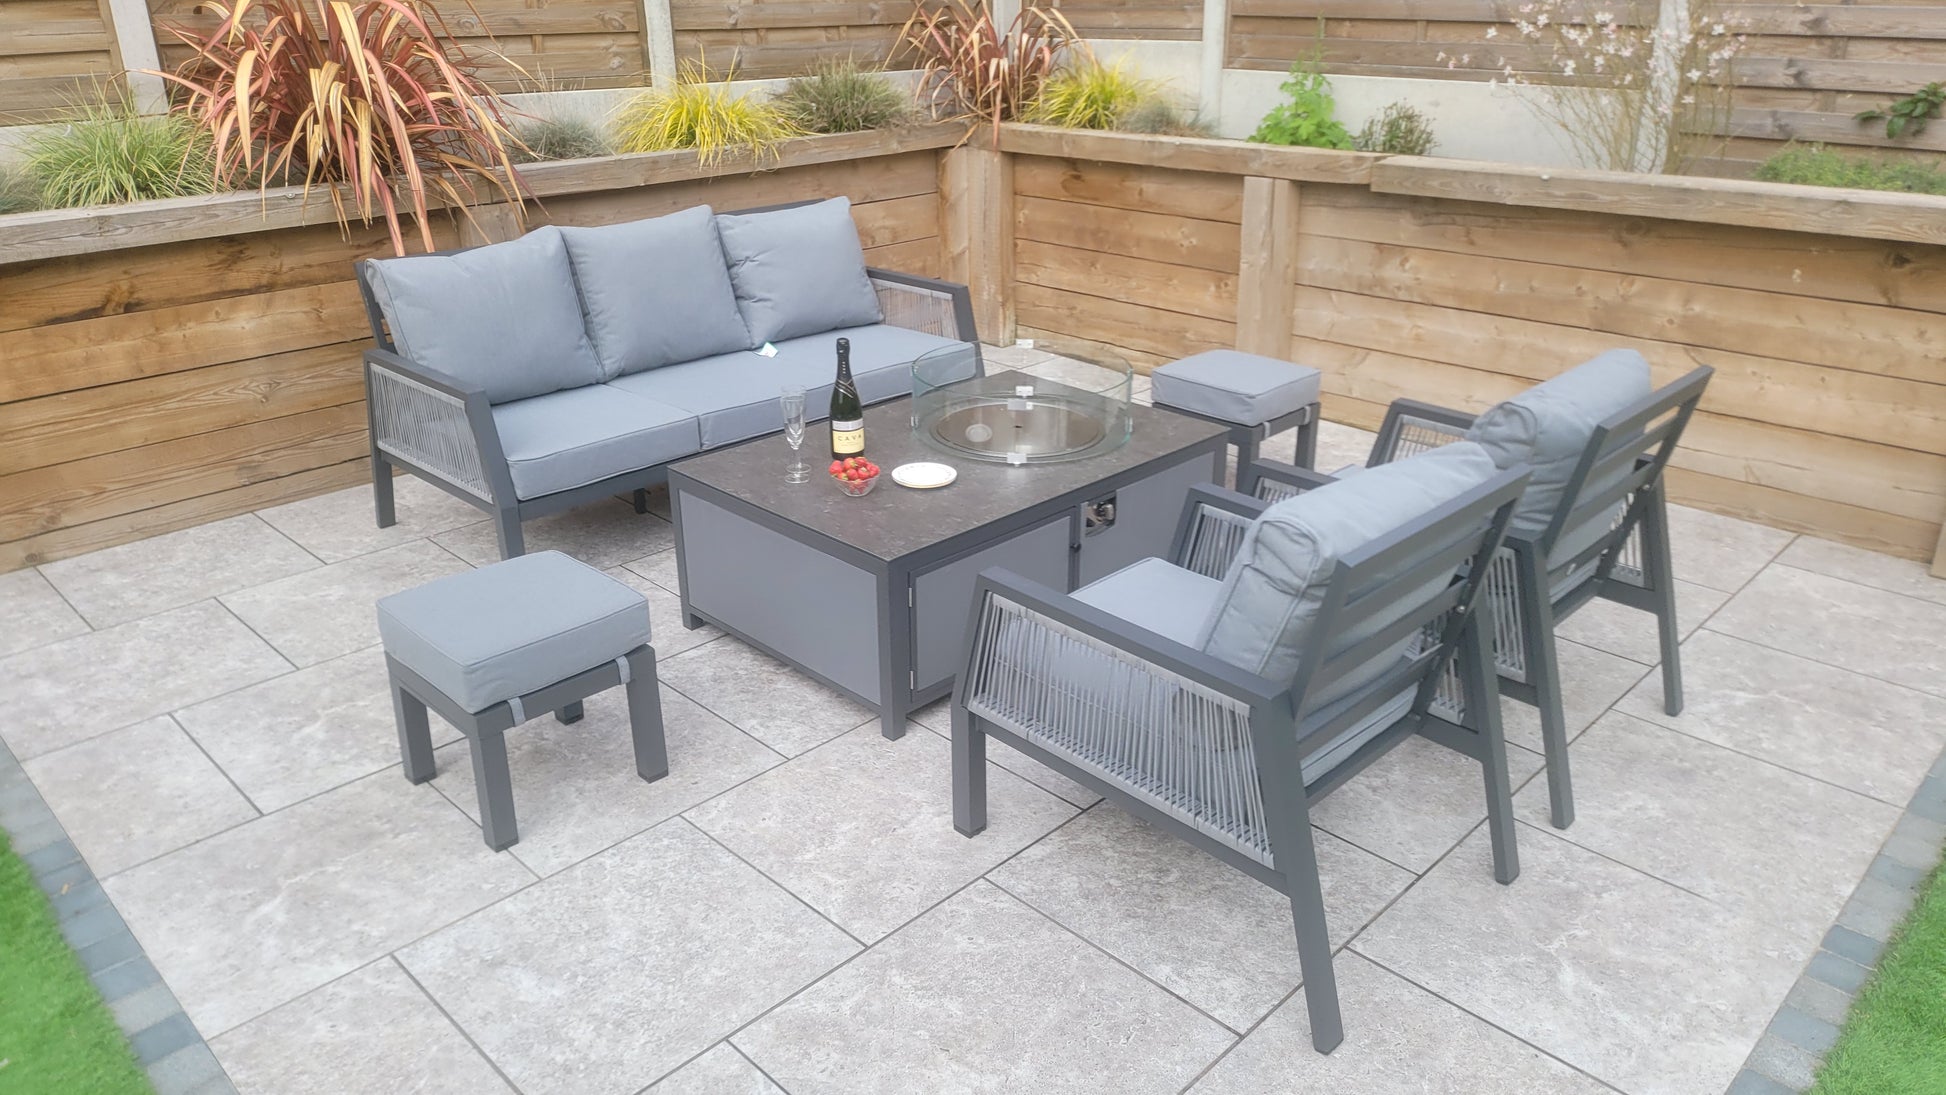 Signature Weave - Bettina 3 seat sofa + 2 armchairs & Gas fire pit table - Beyond outdoor living